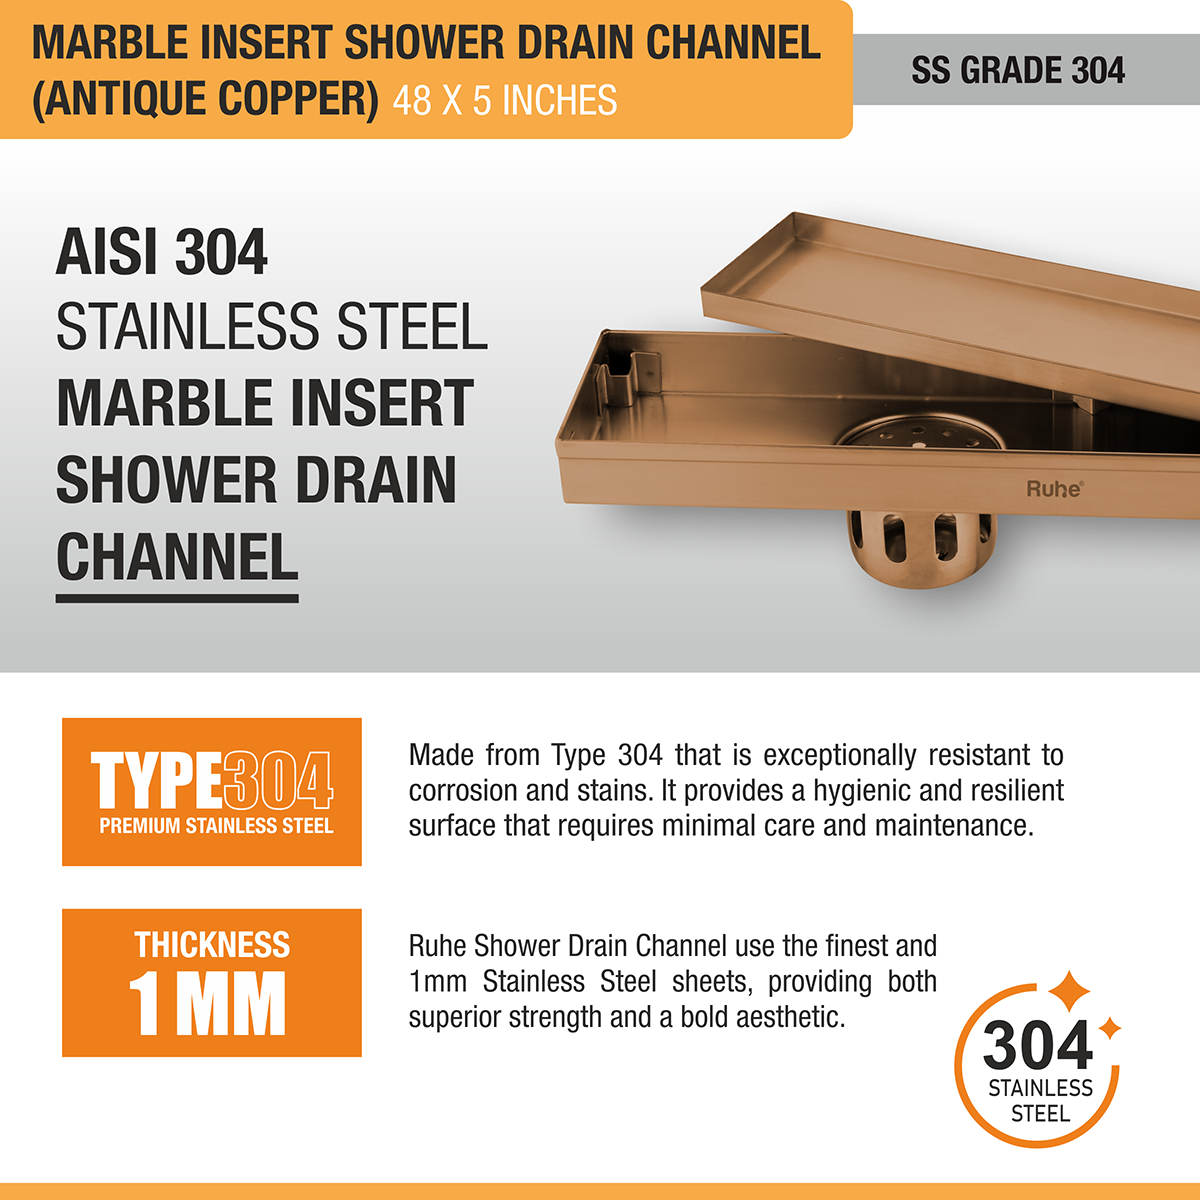 Marble Insert Shower Drain Channel (48 x 5 Inches) ROSE GOLD PVD Coated stainless steel